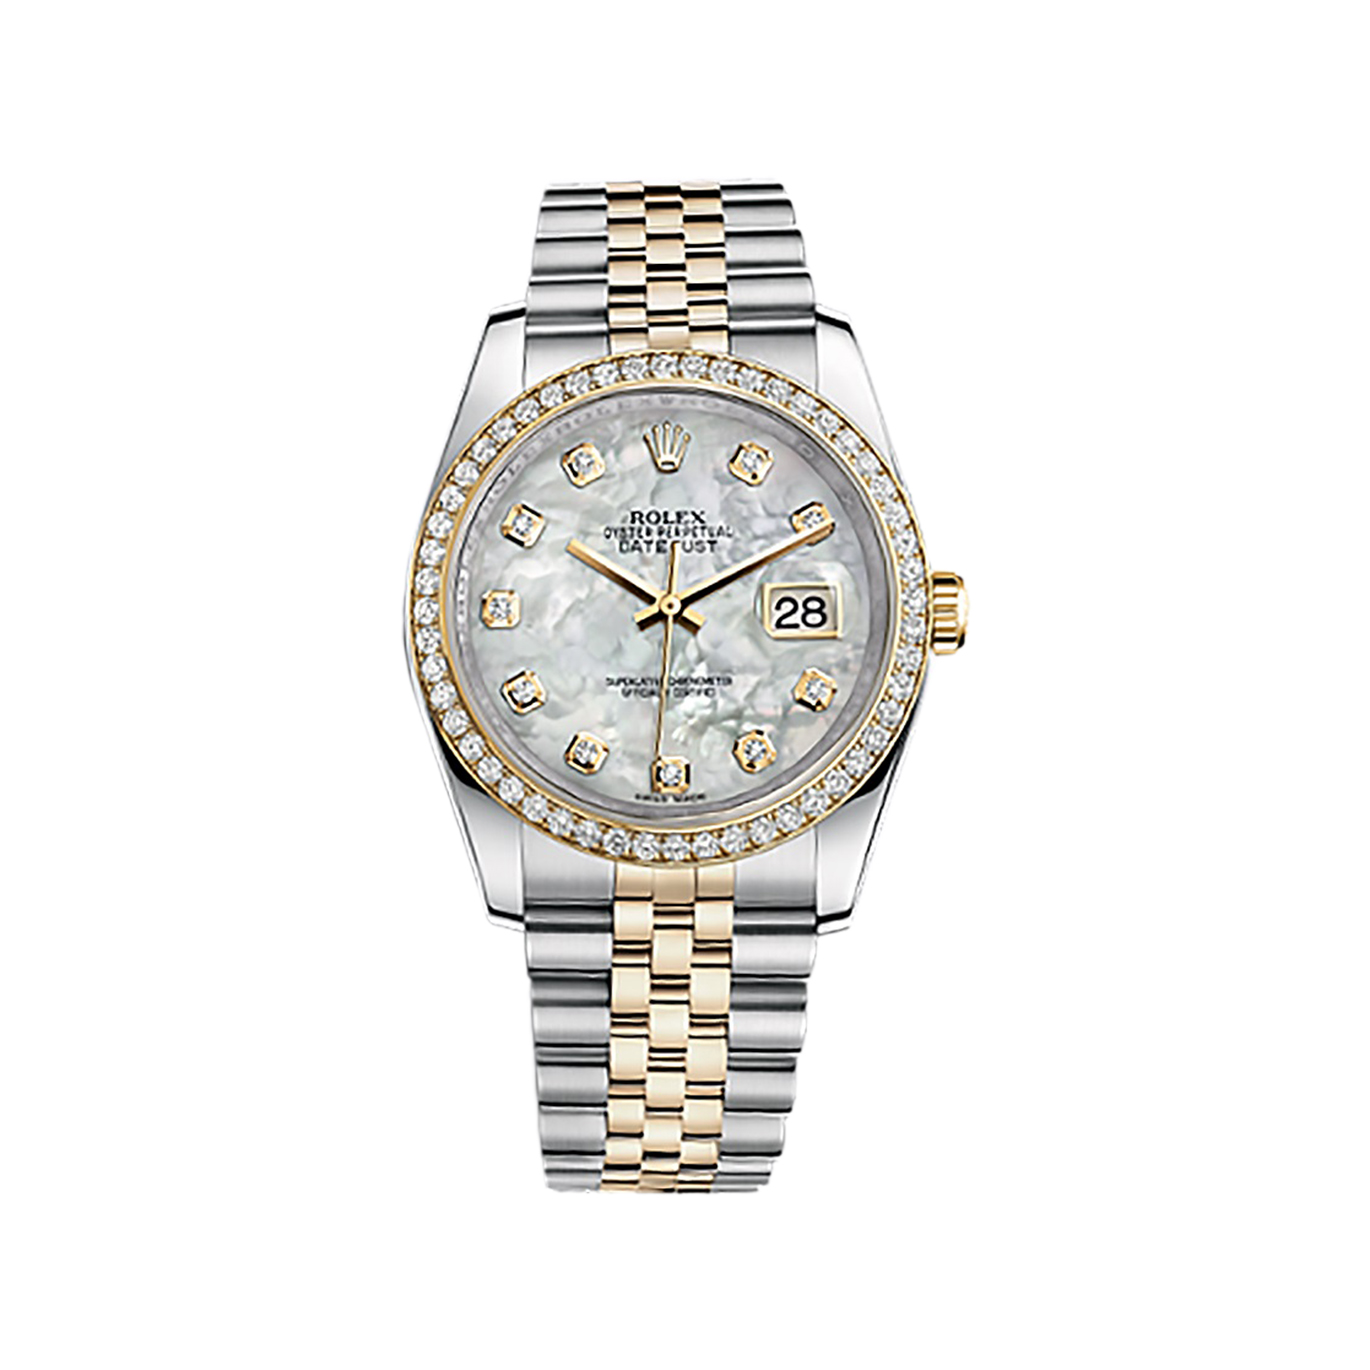 Datejust 36 116243 Gold & Stainless Steel Watch (White Mother-of-Pearl Set with Diamonds)